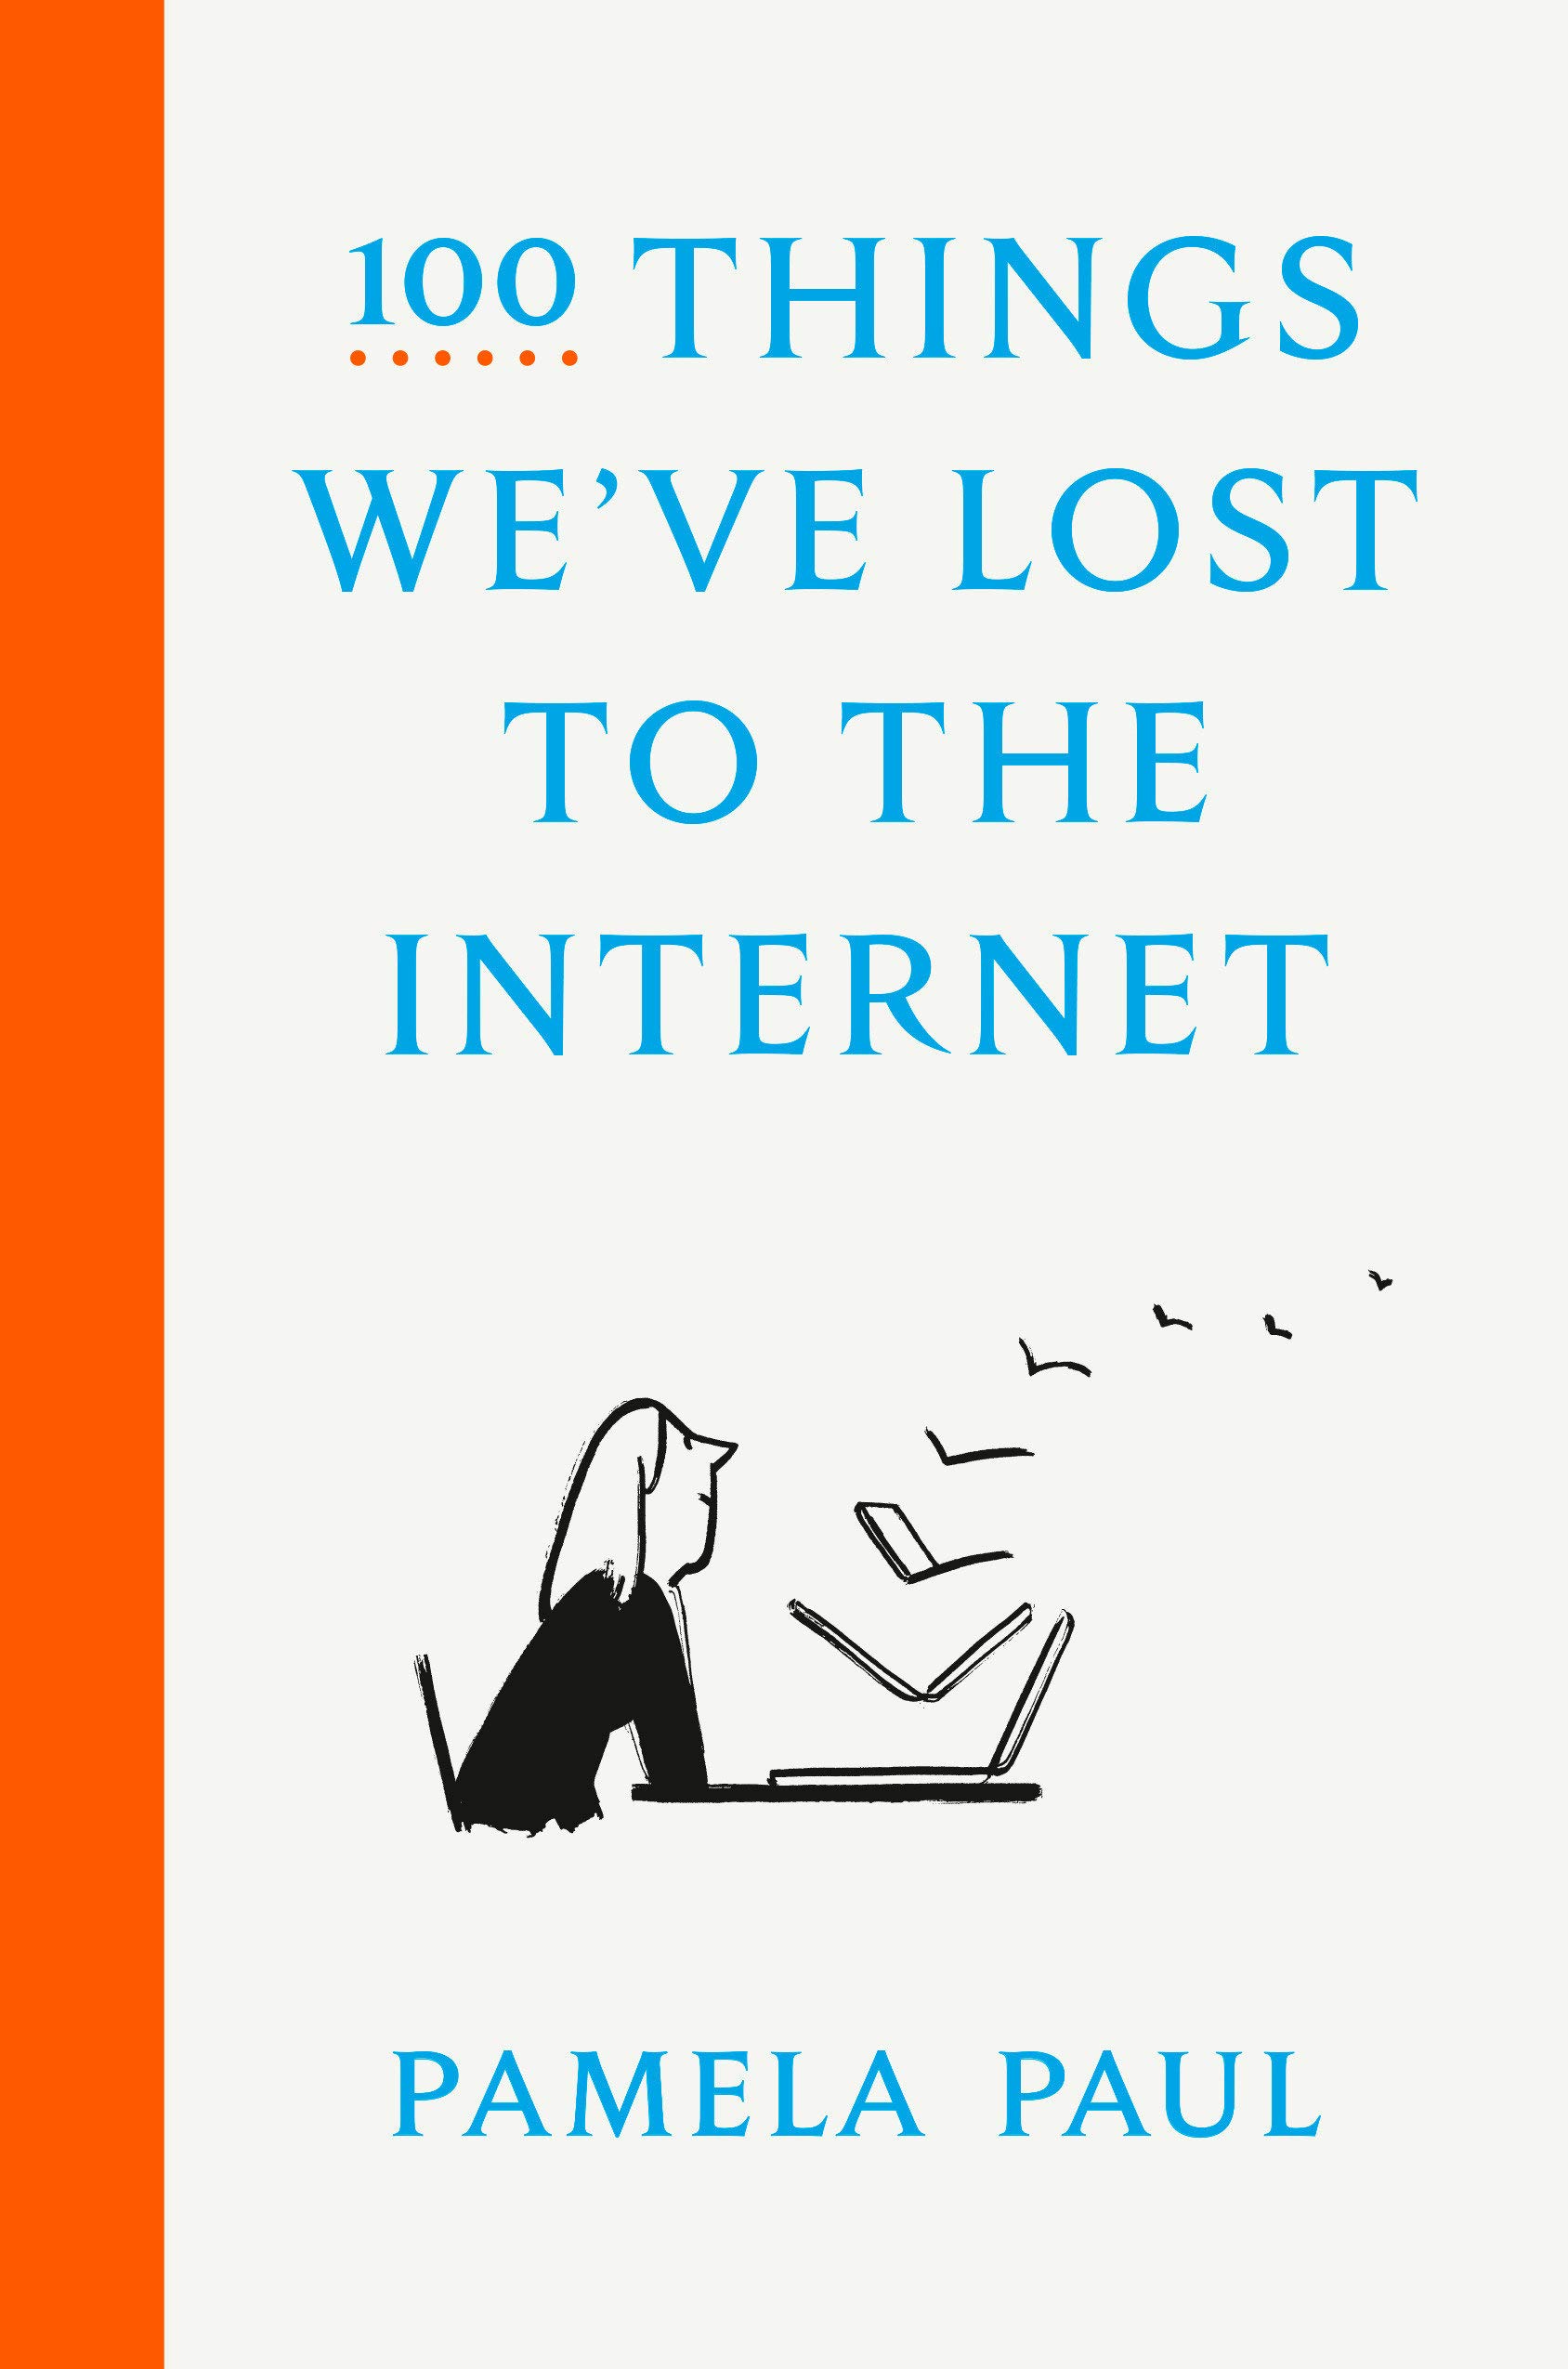 Pamela Paul: 100 Things We've Lost to the Internet (2021, Crown Publishing Group, The)